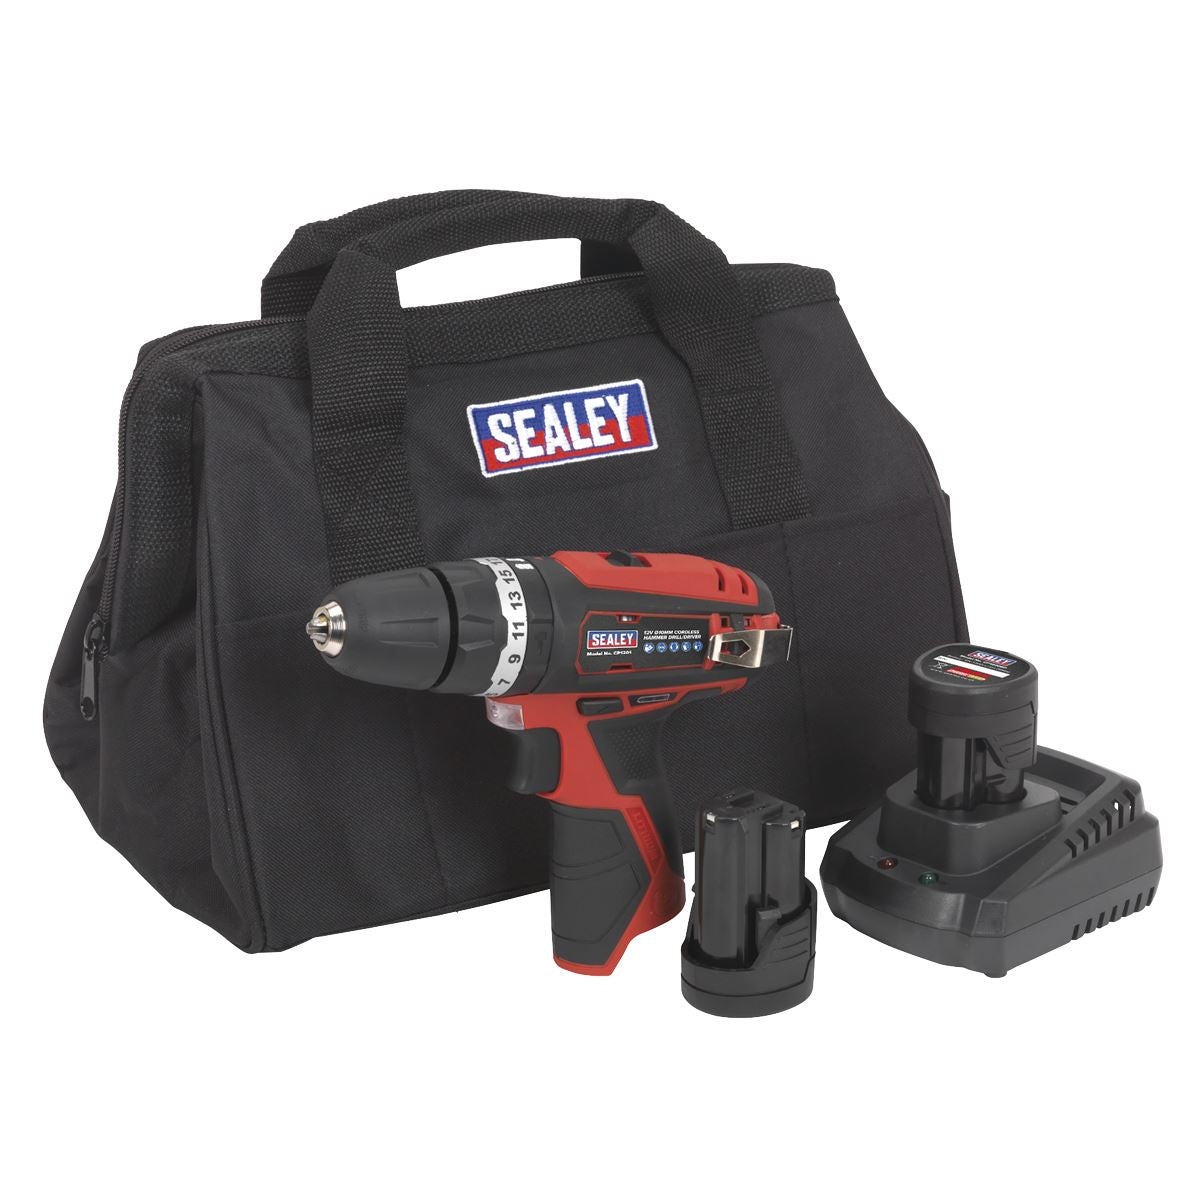 Sealey Hammer Drill/Driver Kit 10mm 12V Lithium-ion - 2 Batteries CP1201KIT